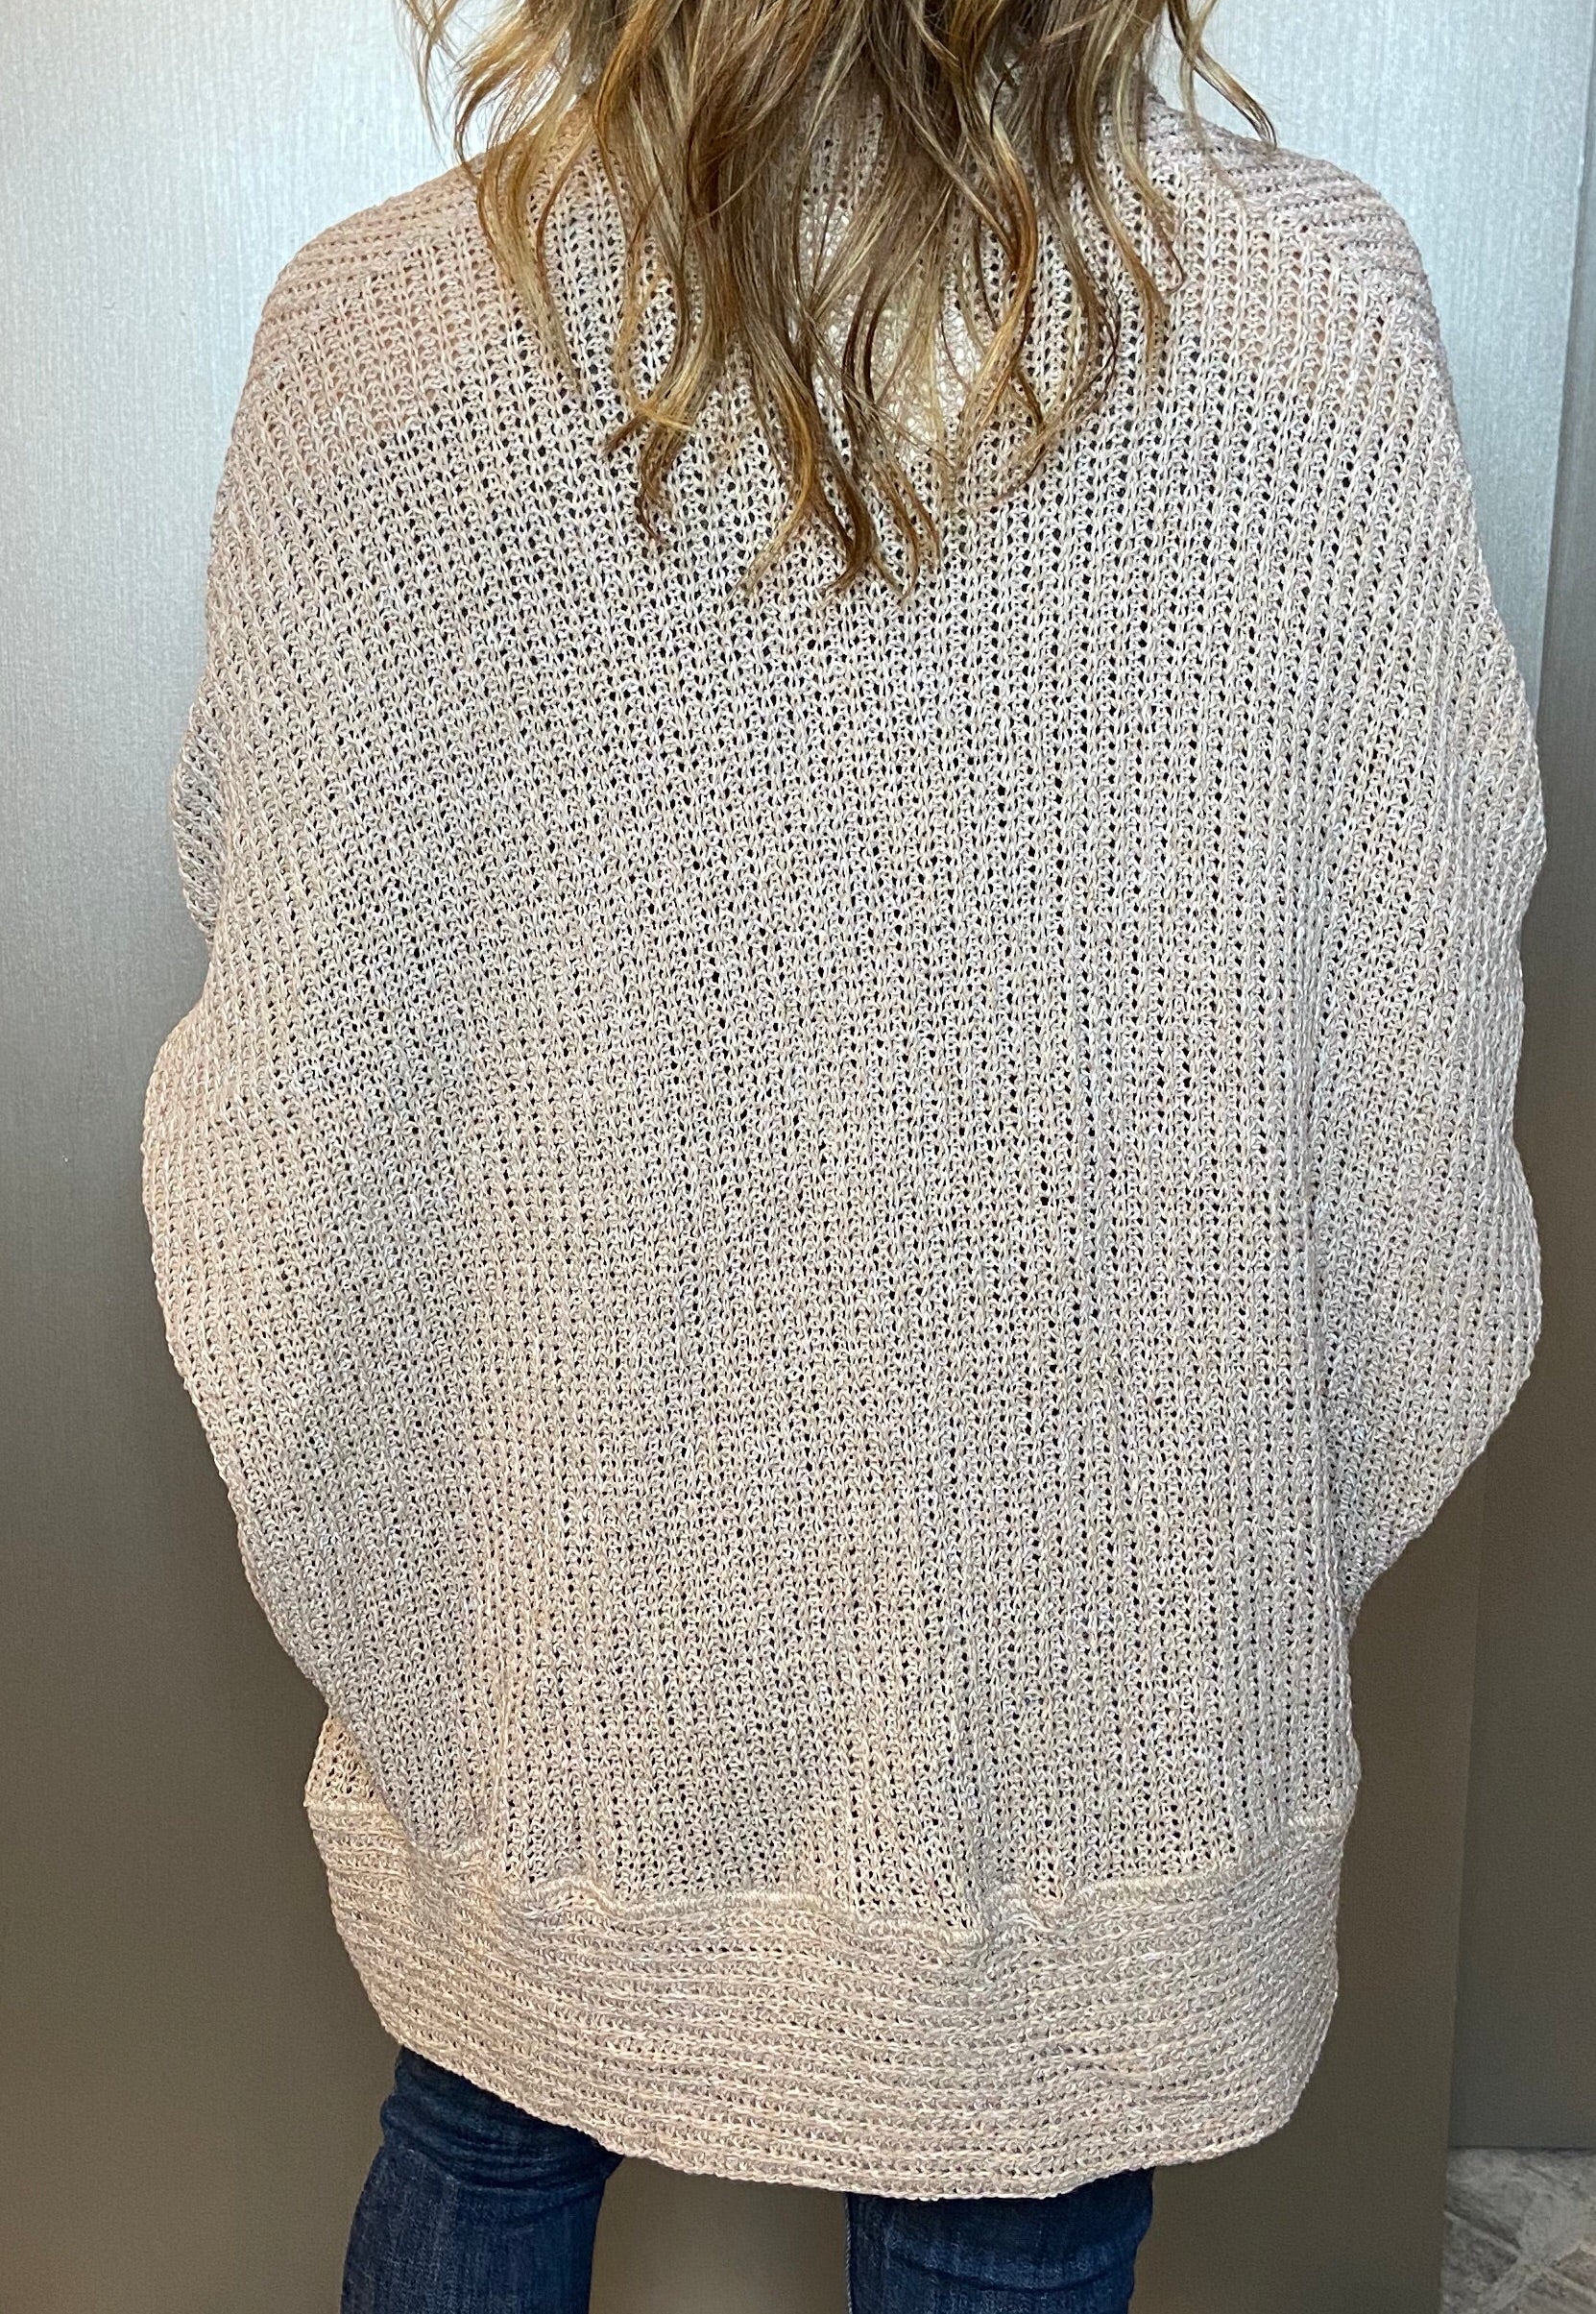 Cocoon knit